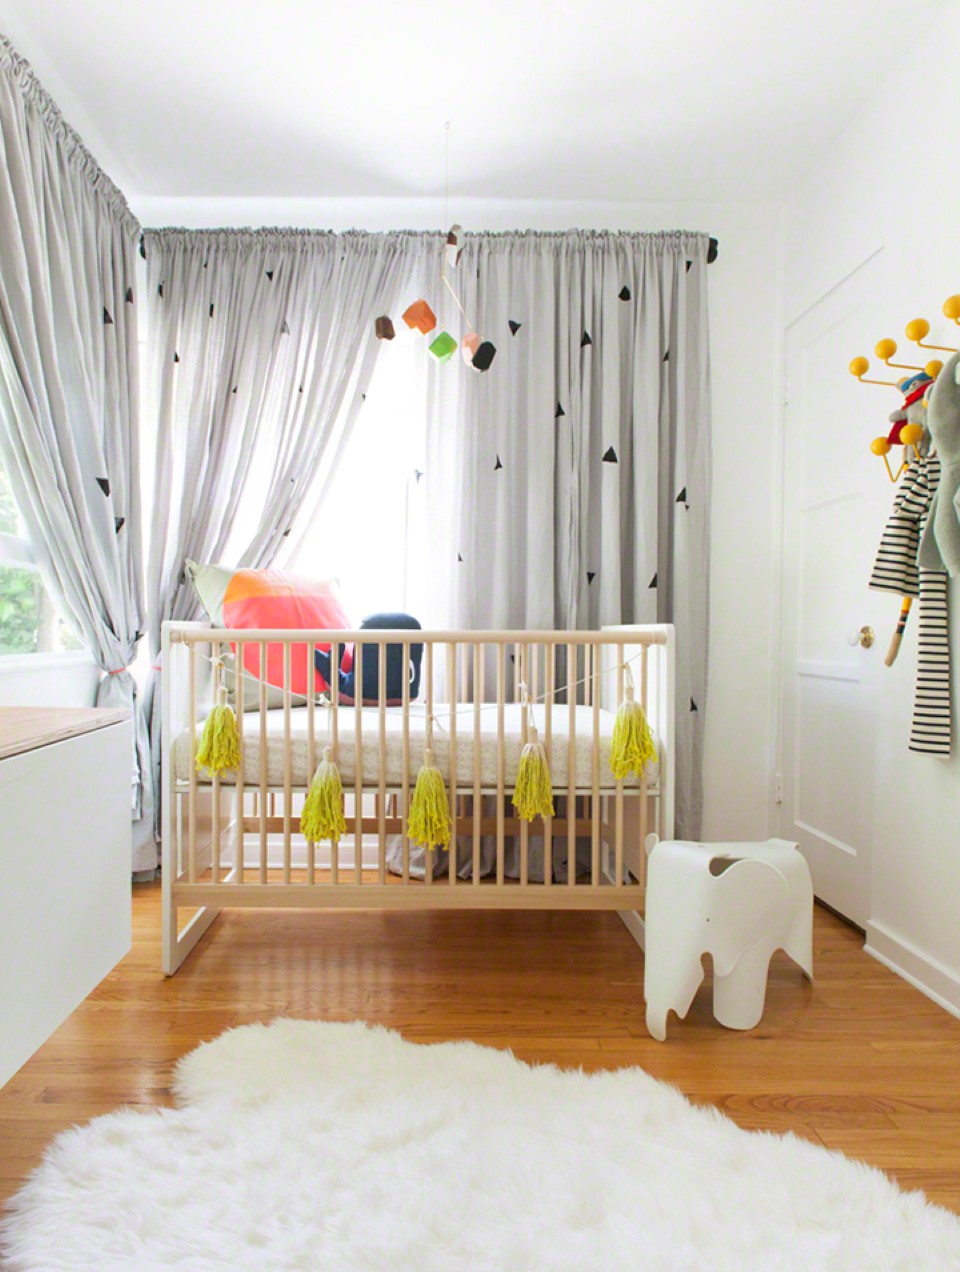 Curtain For Idea Modern Curtain For Large Window Idea Feat Cool Baby Nursery Furniture Design And Thick Fur Area Rug Kids Room Modern And Minimalist Baby Nursery Furniture Ideas